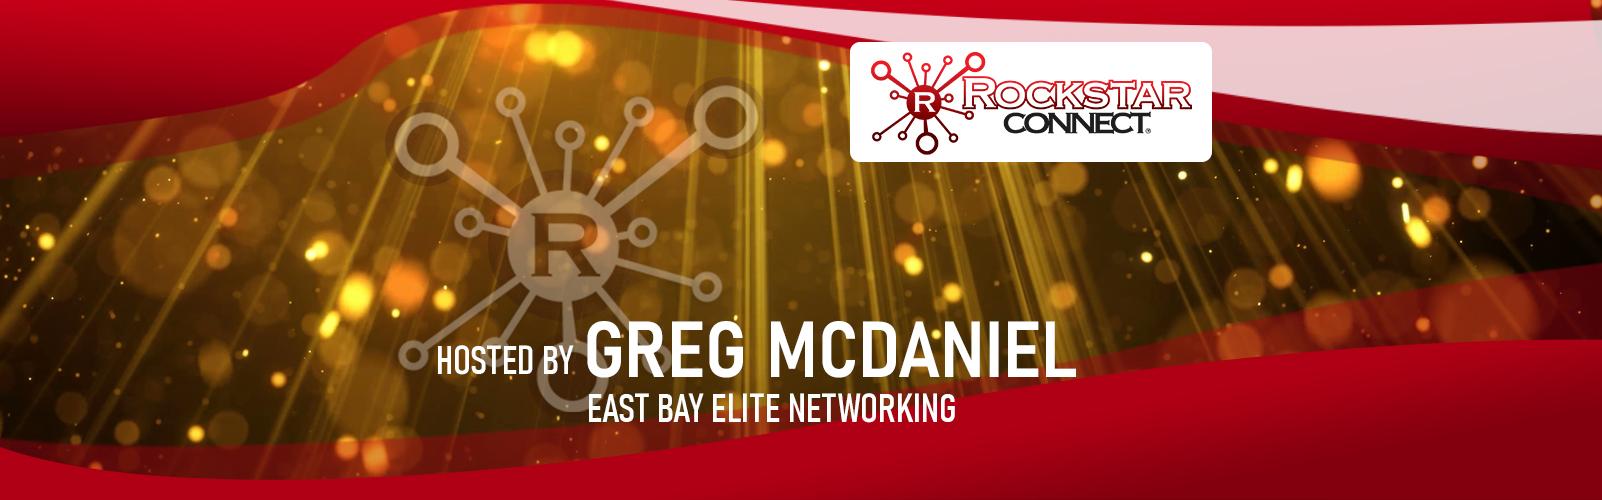 Free East Bay Elite Rockstar Connect Networking Event (January, near Oakland)